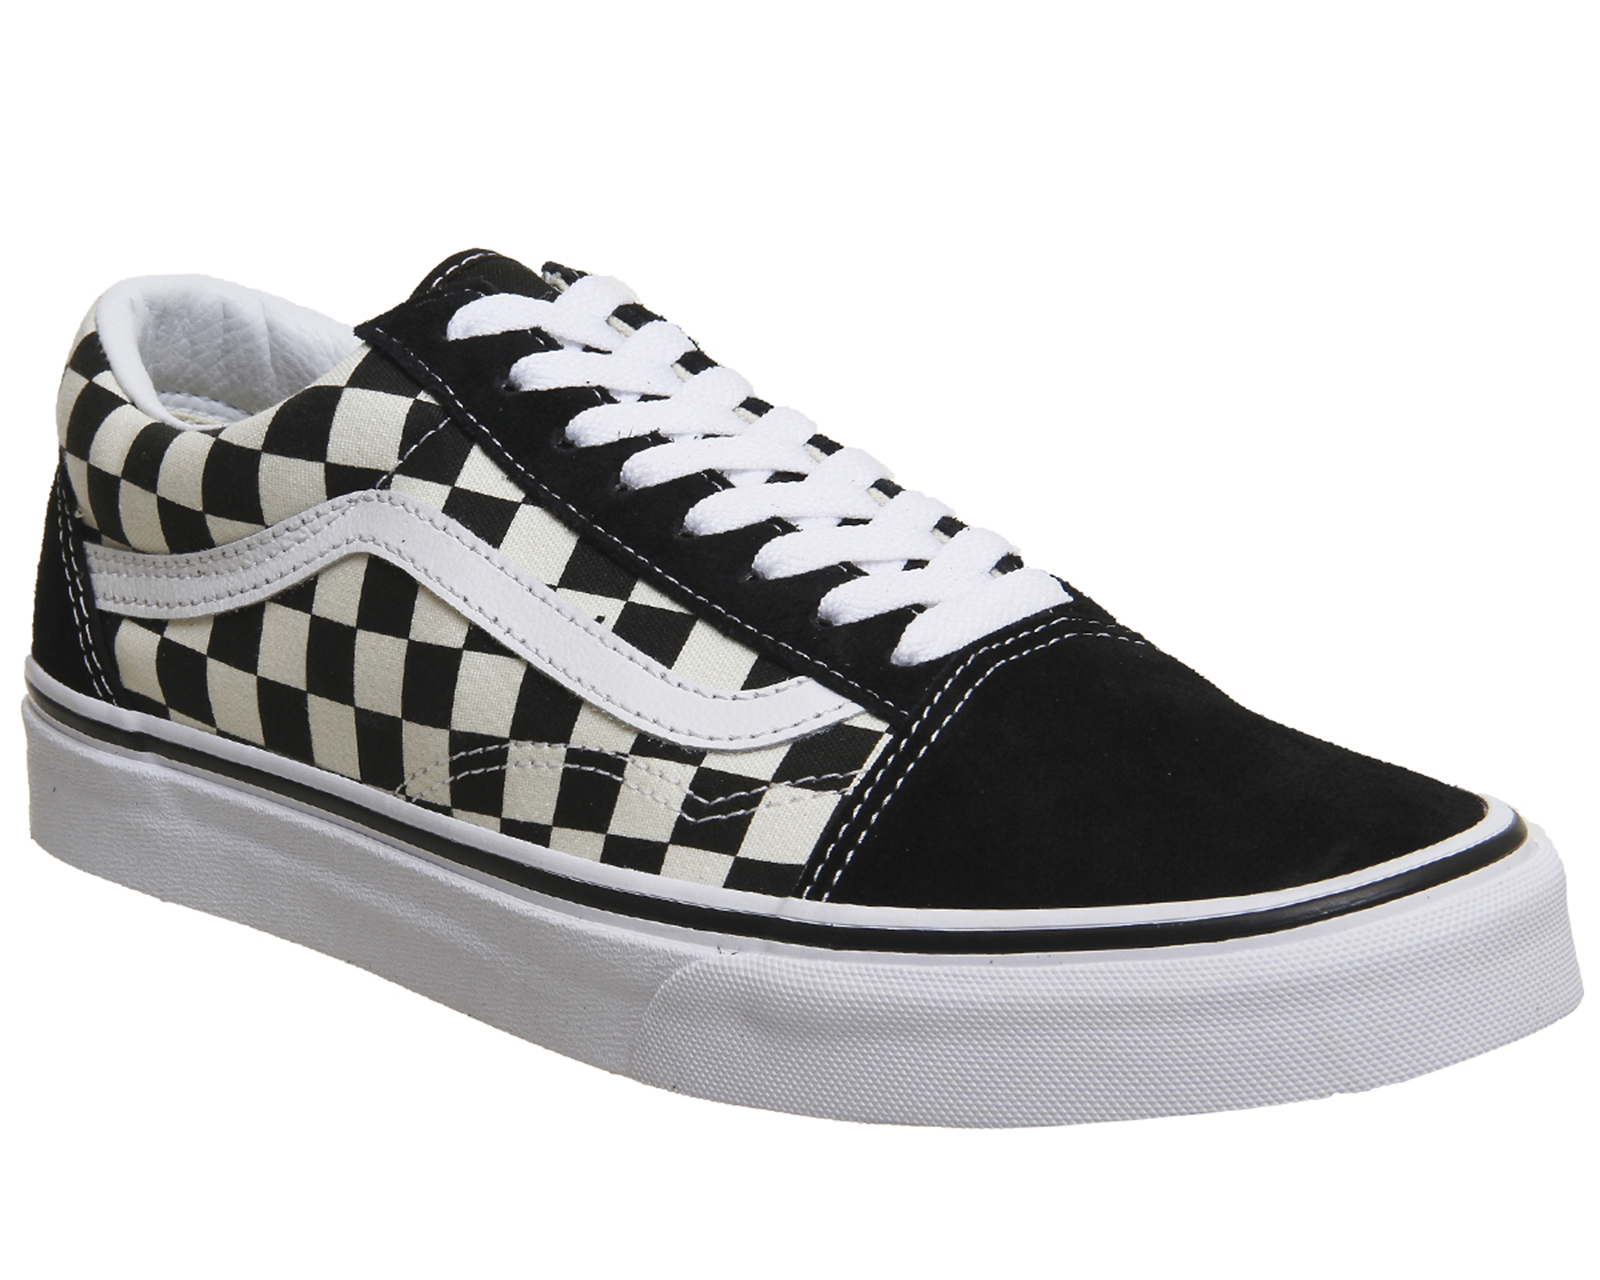 checkered vans trainers 